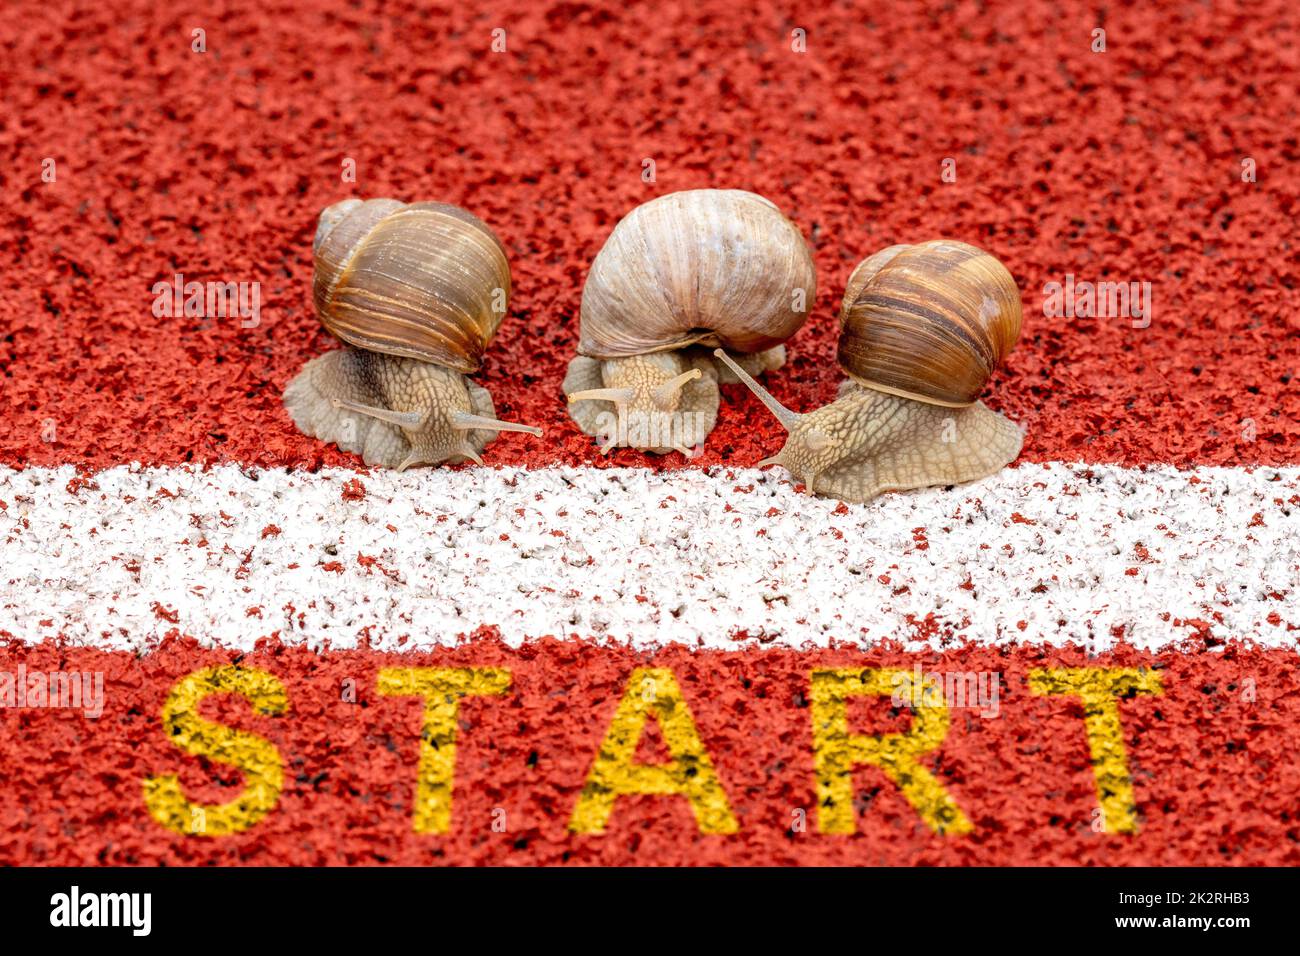 Three racing snails in front of start line Stock Photo